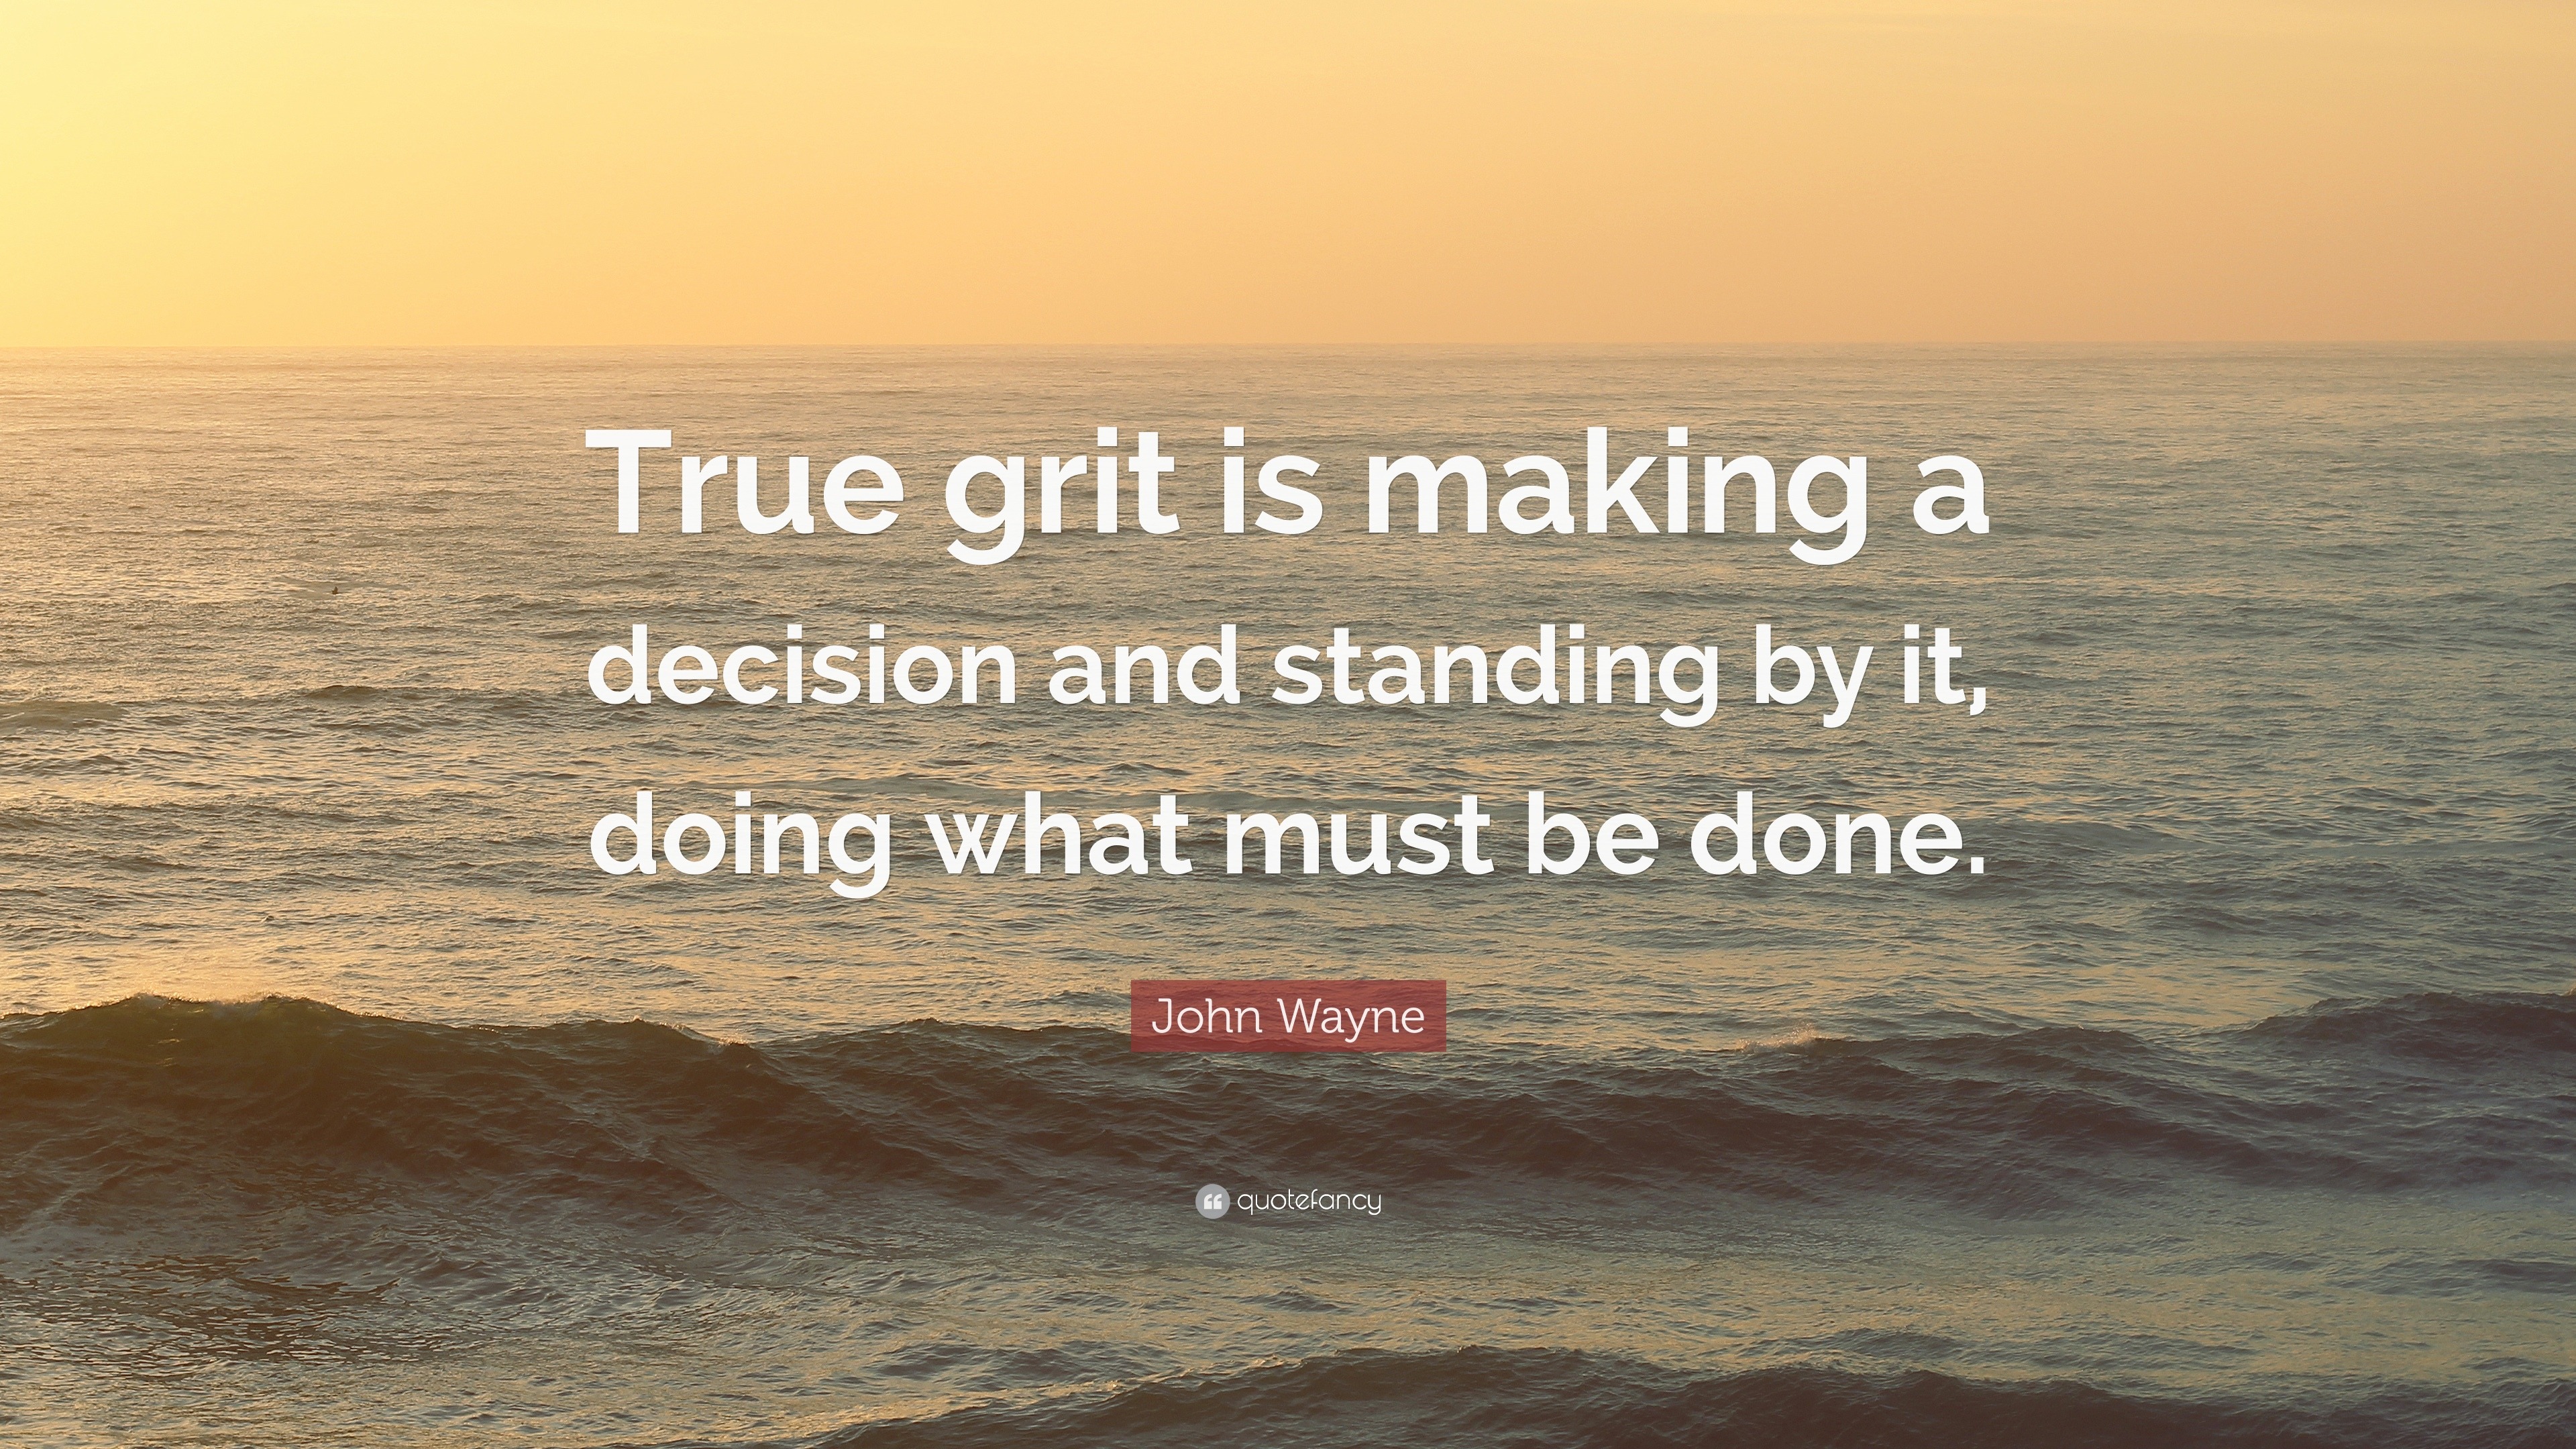 1748464 John Wayne Quote True grit is making a decision and standing by it